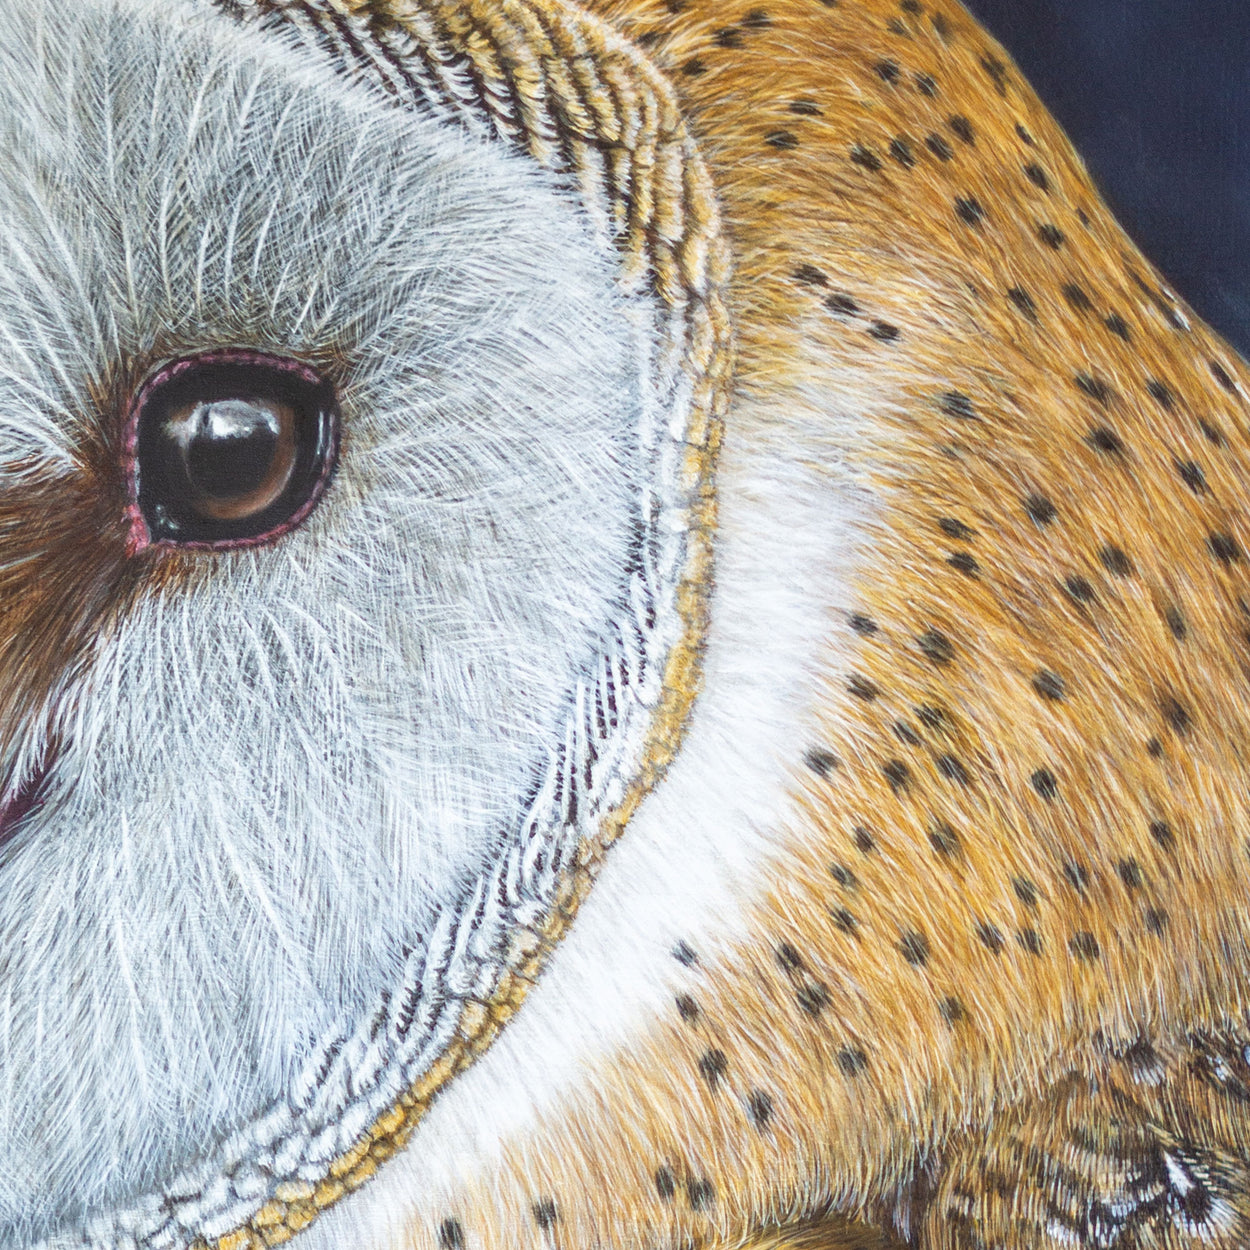 Barn owl portrait  painting close-up 1 - by Jill Dimond